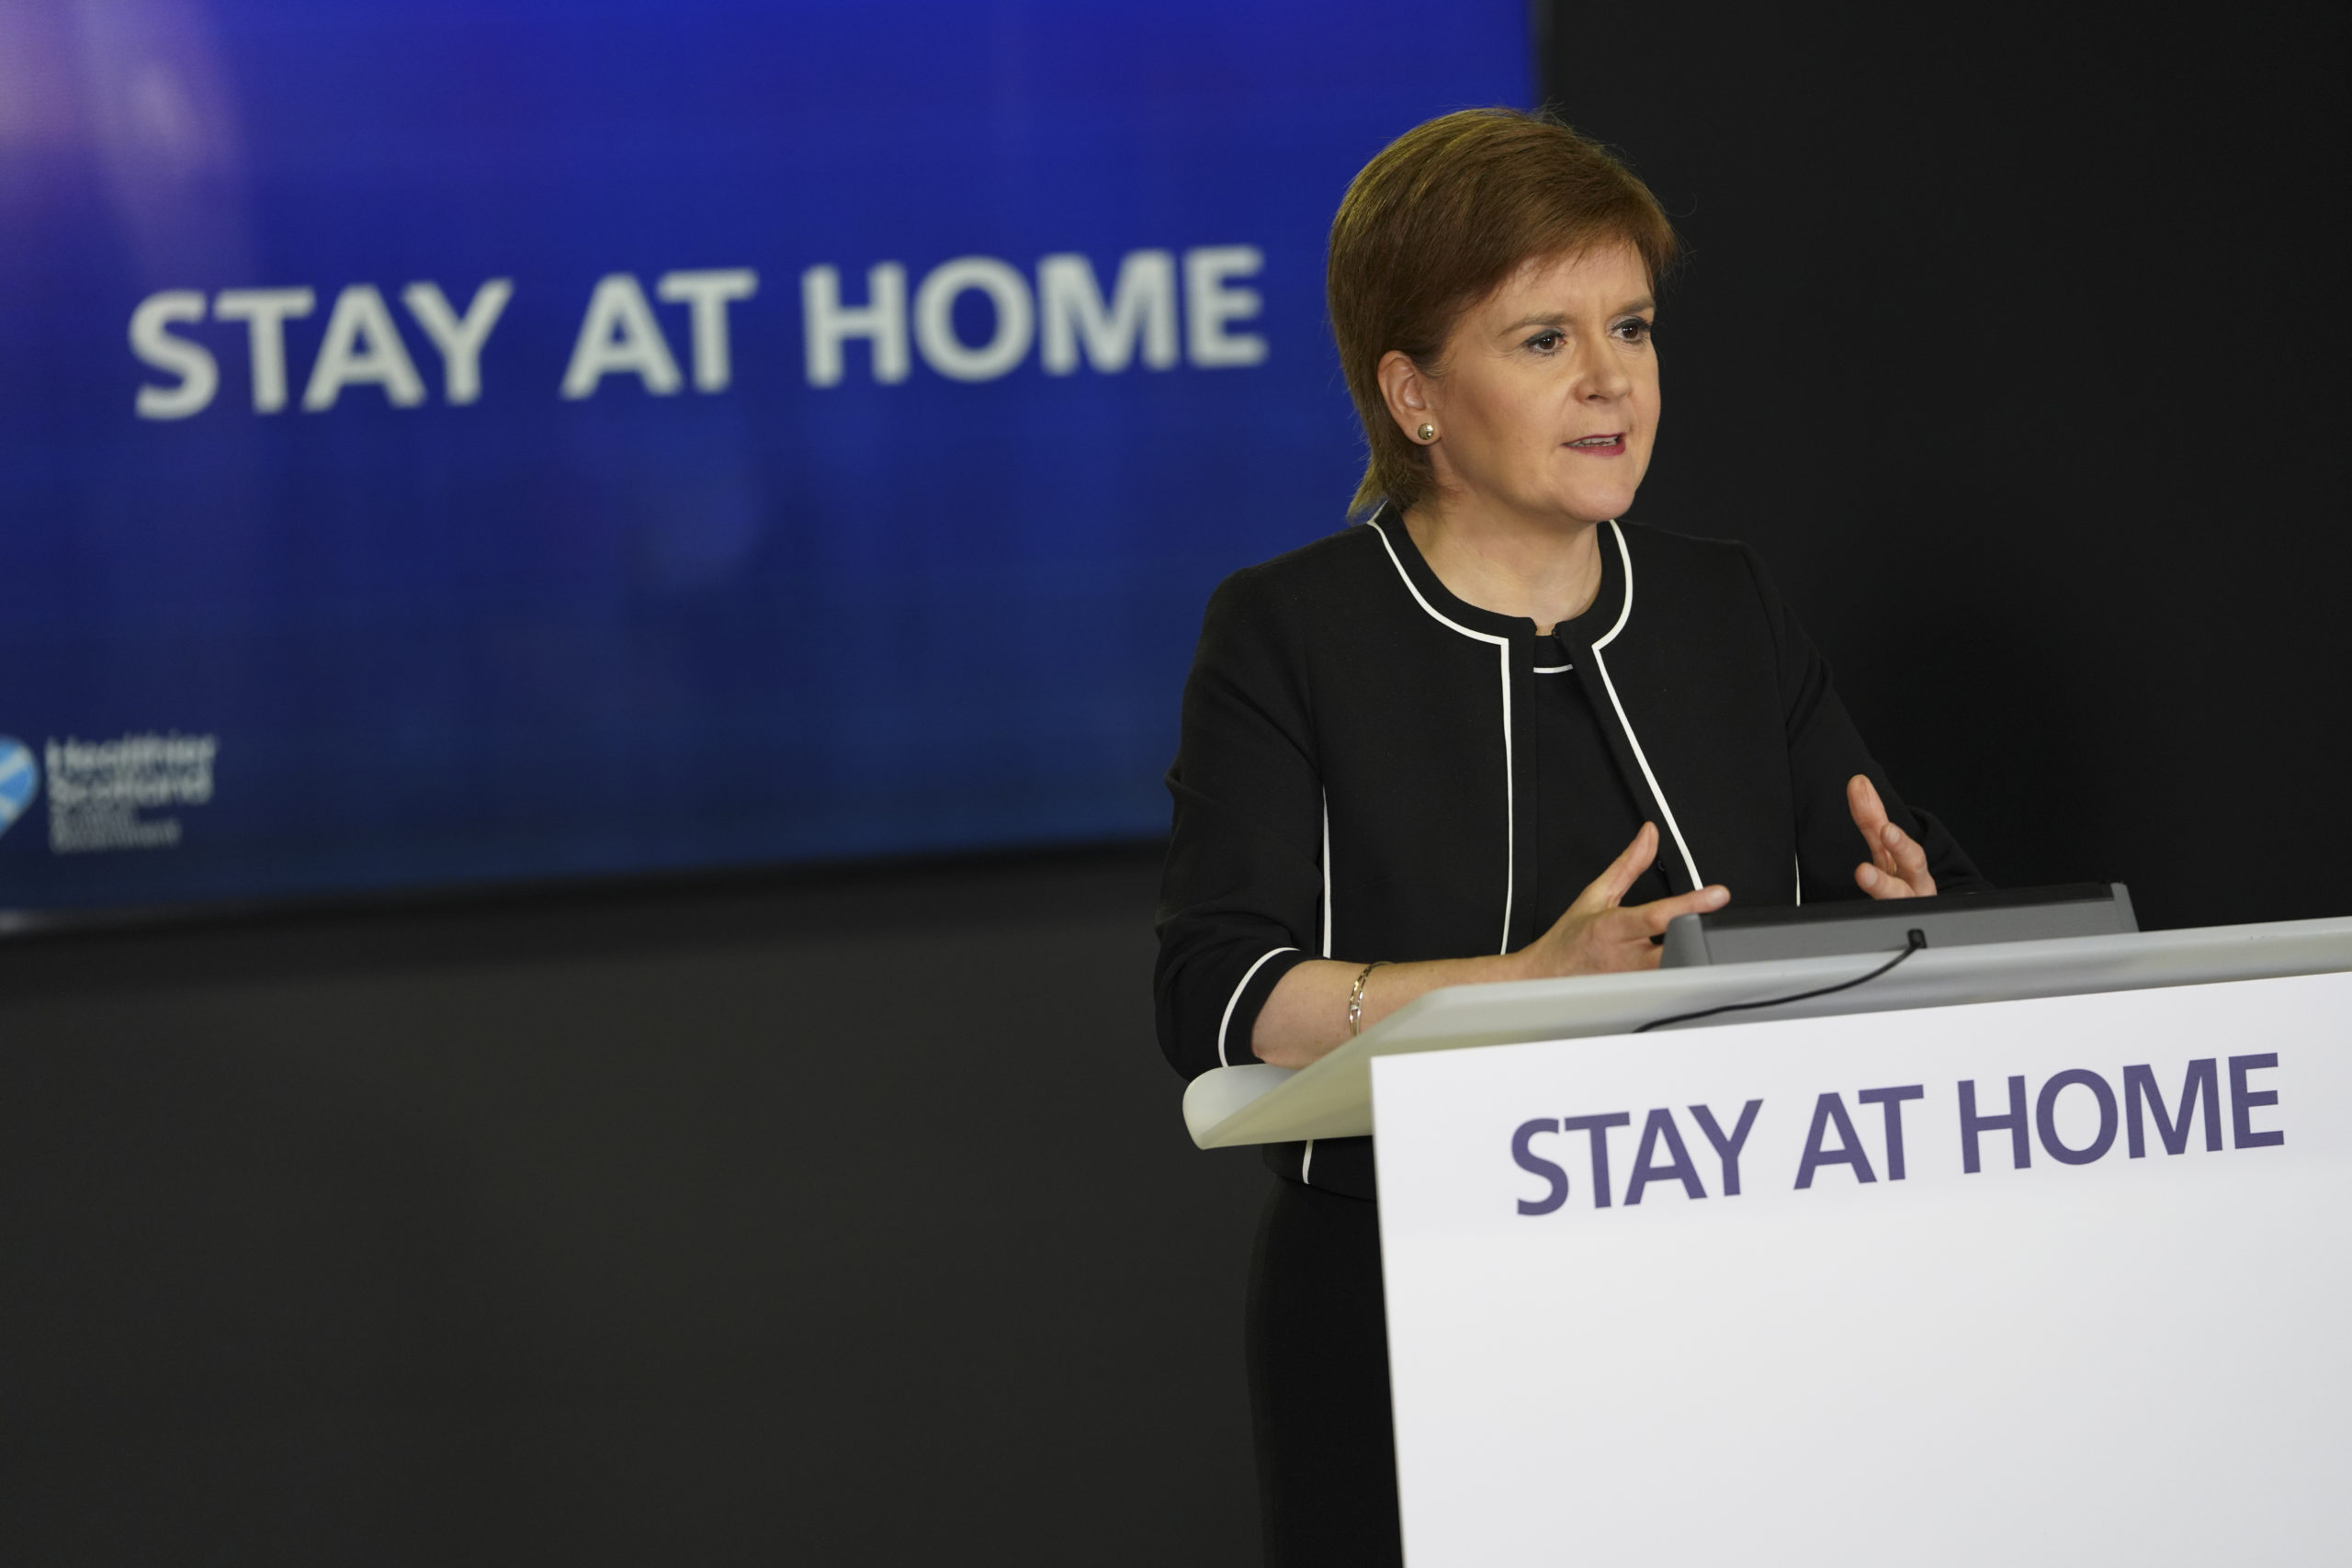 Nicola Sturgeon urged people to be cautious as she eased some lockdown restrictions